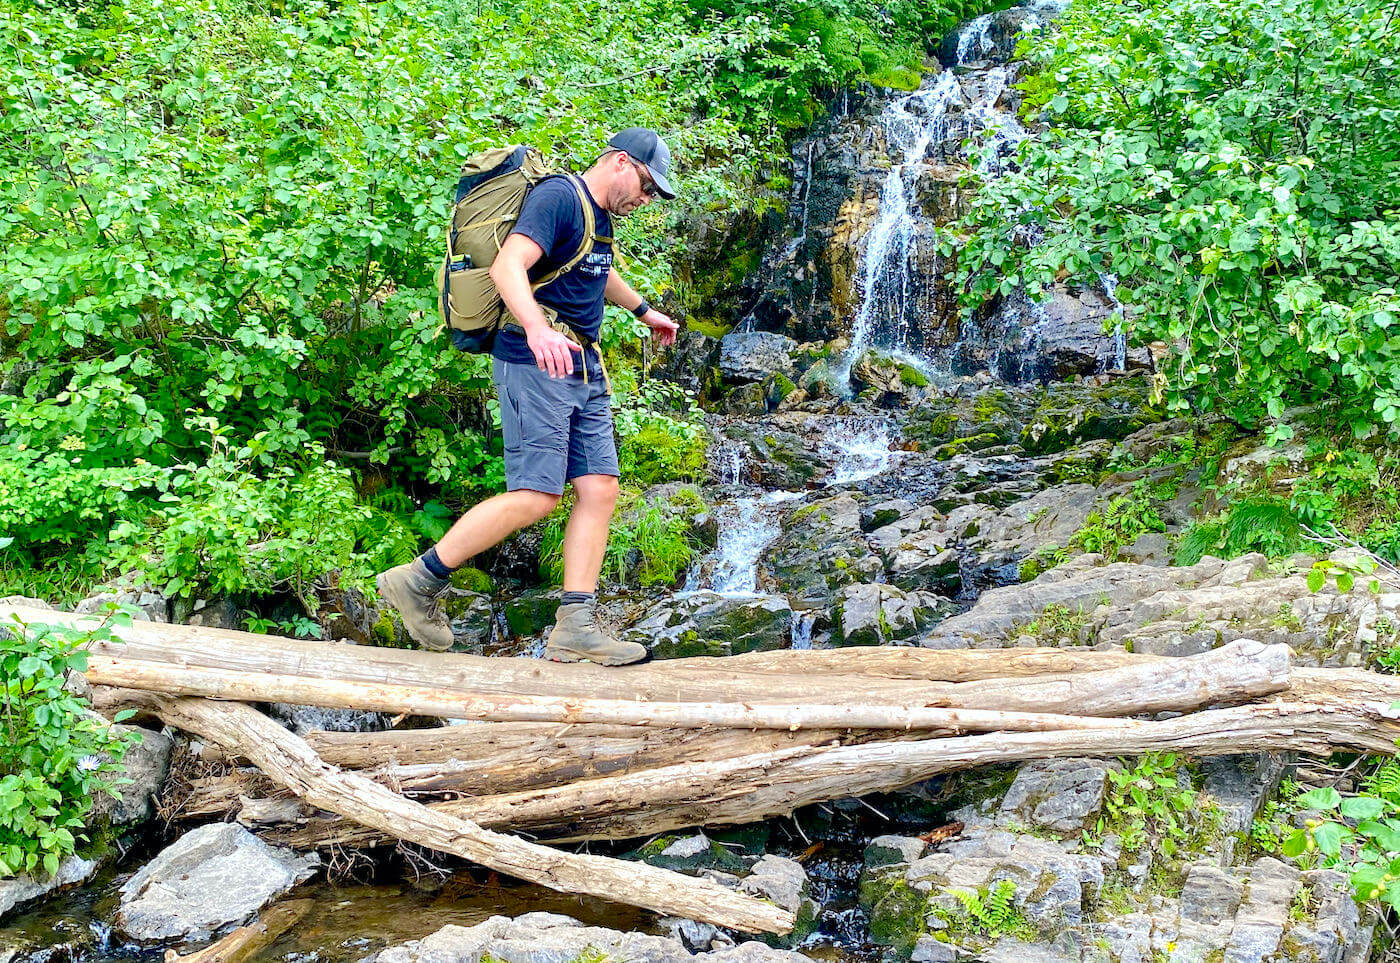 This photo shows the author wearing KUHL Renegade Shorts while crossing a creek on a log outside while hiking during the testing and review process.